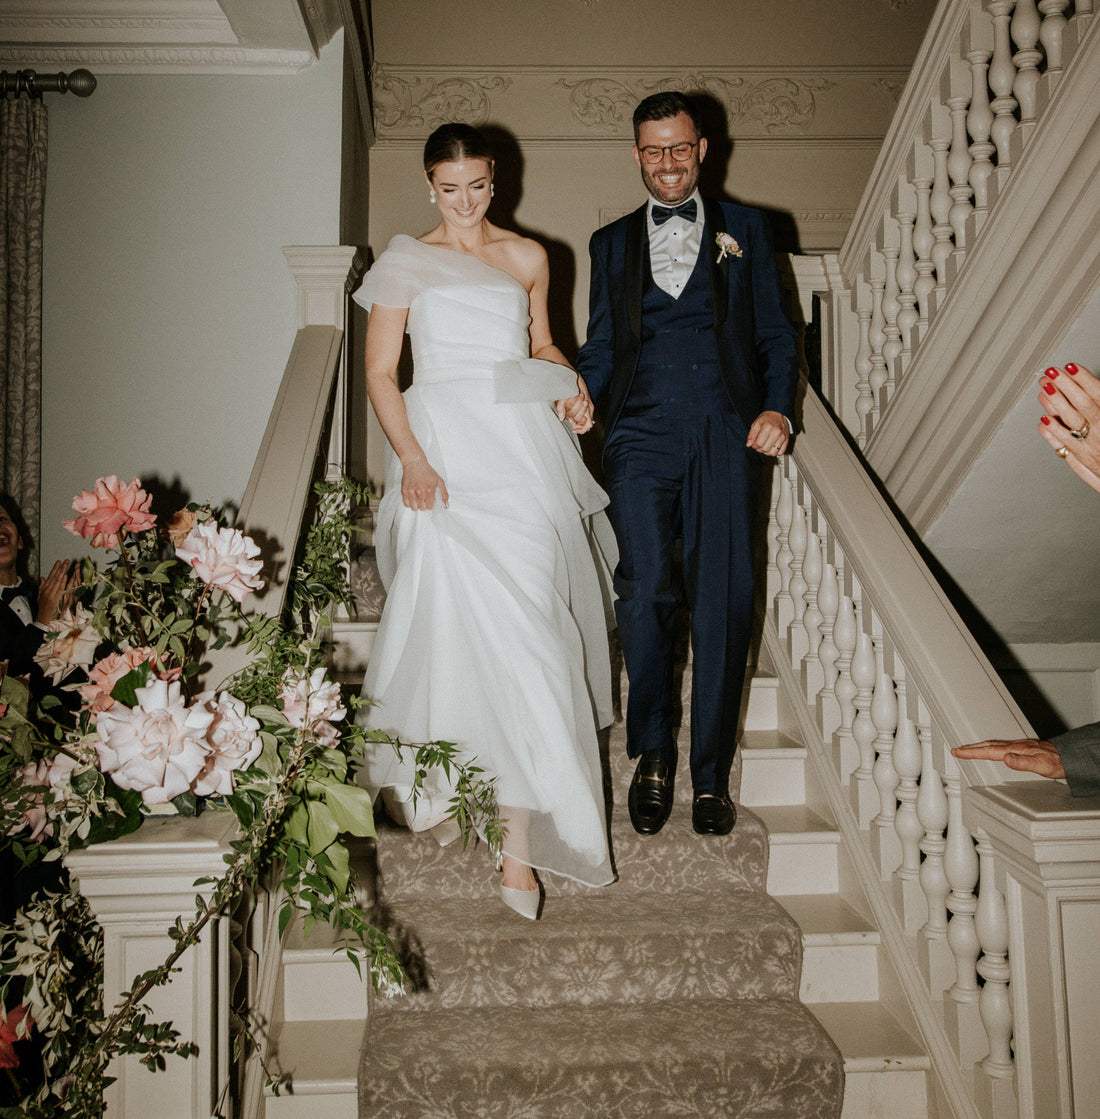 Couple Walking Down Stairs Wearing Bridal Attire